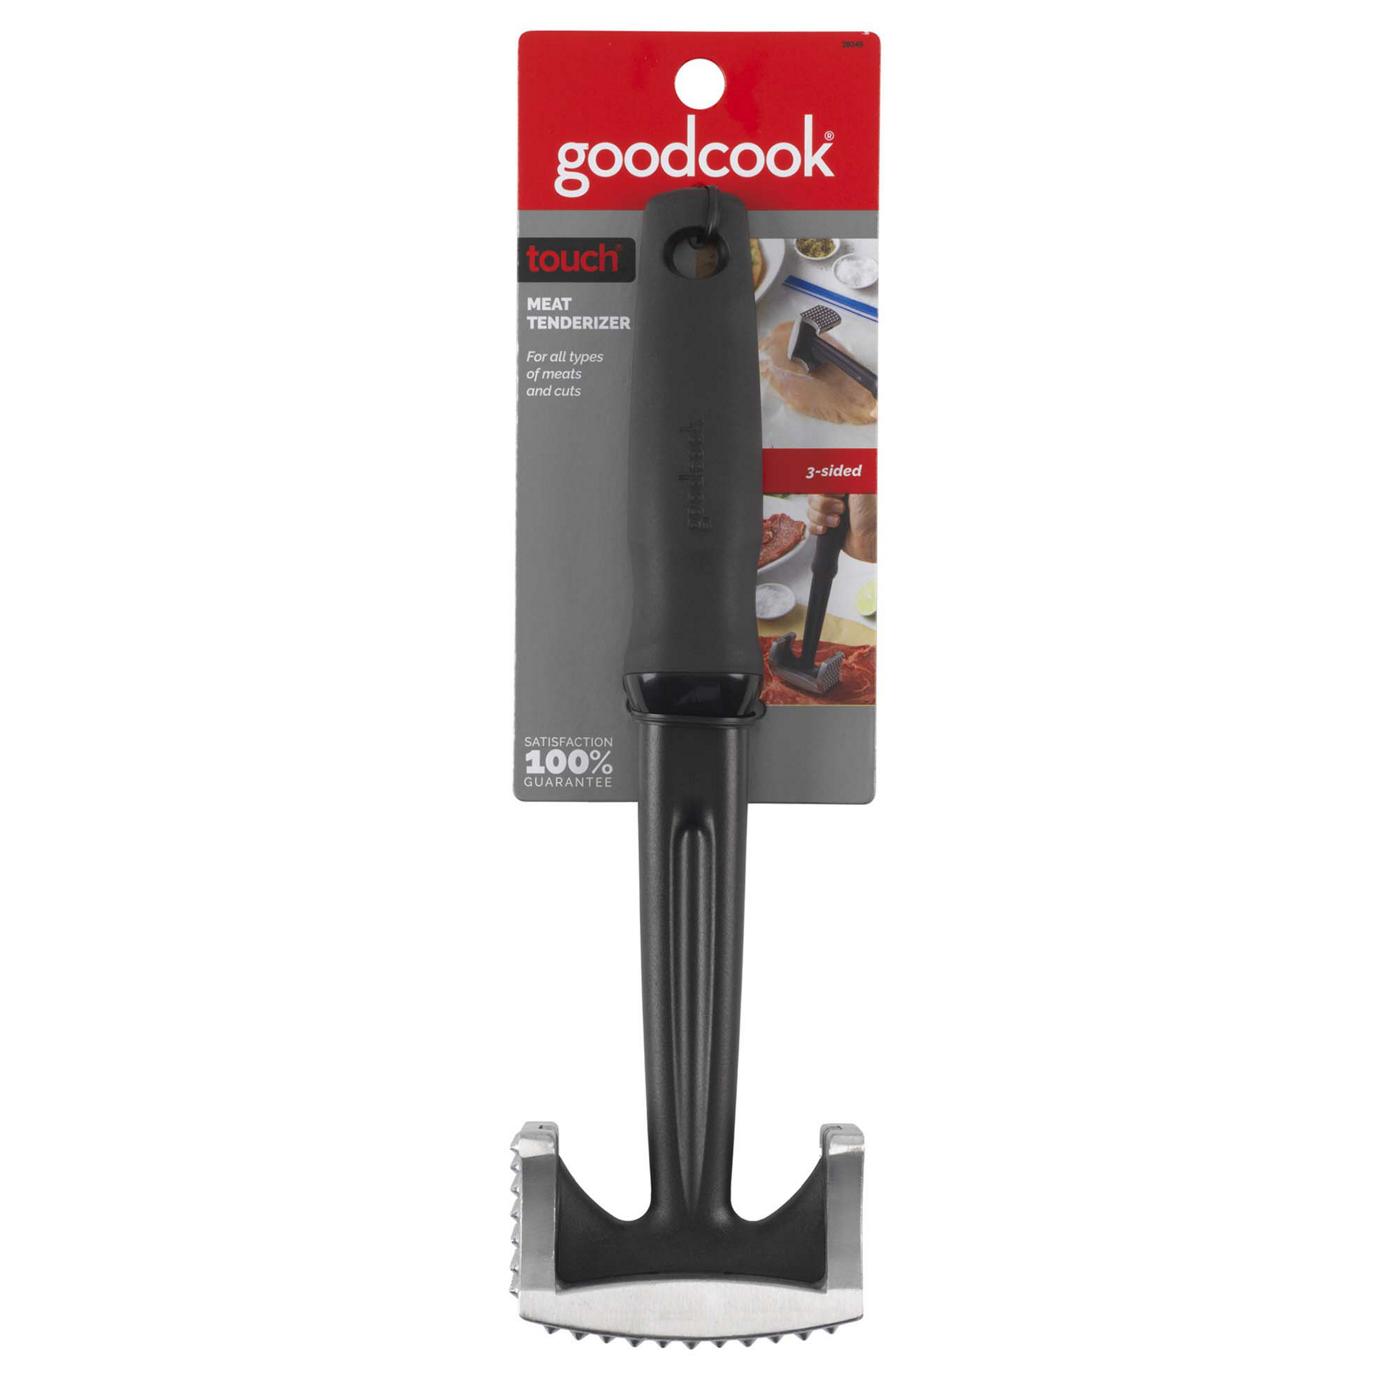 GoodCook Touch Meat Tenderizer; image 1 of 4